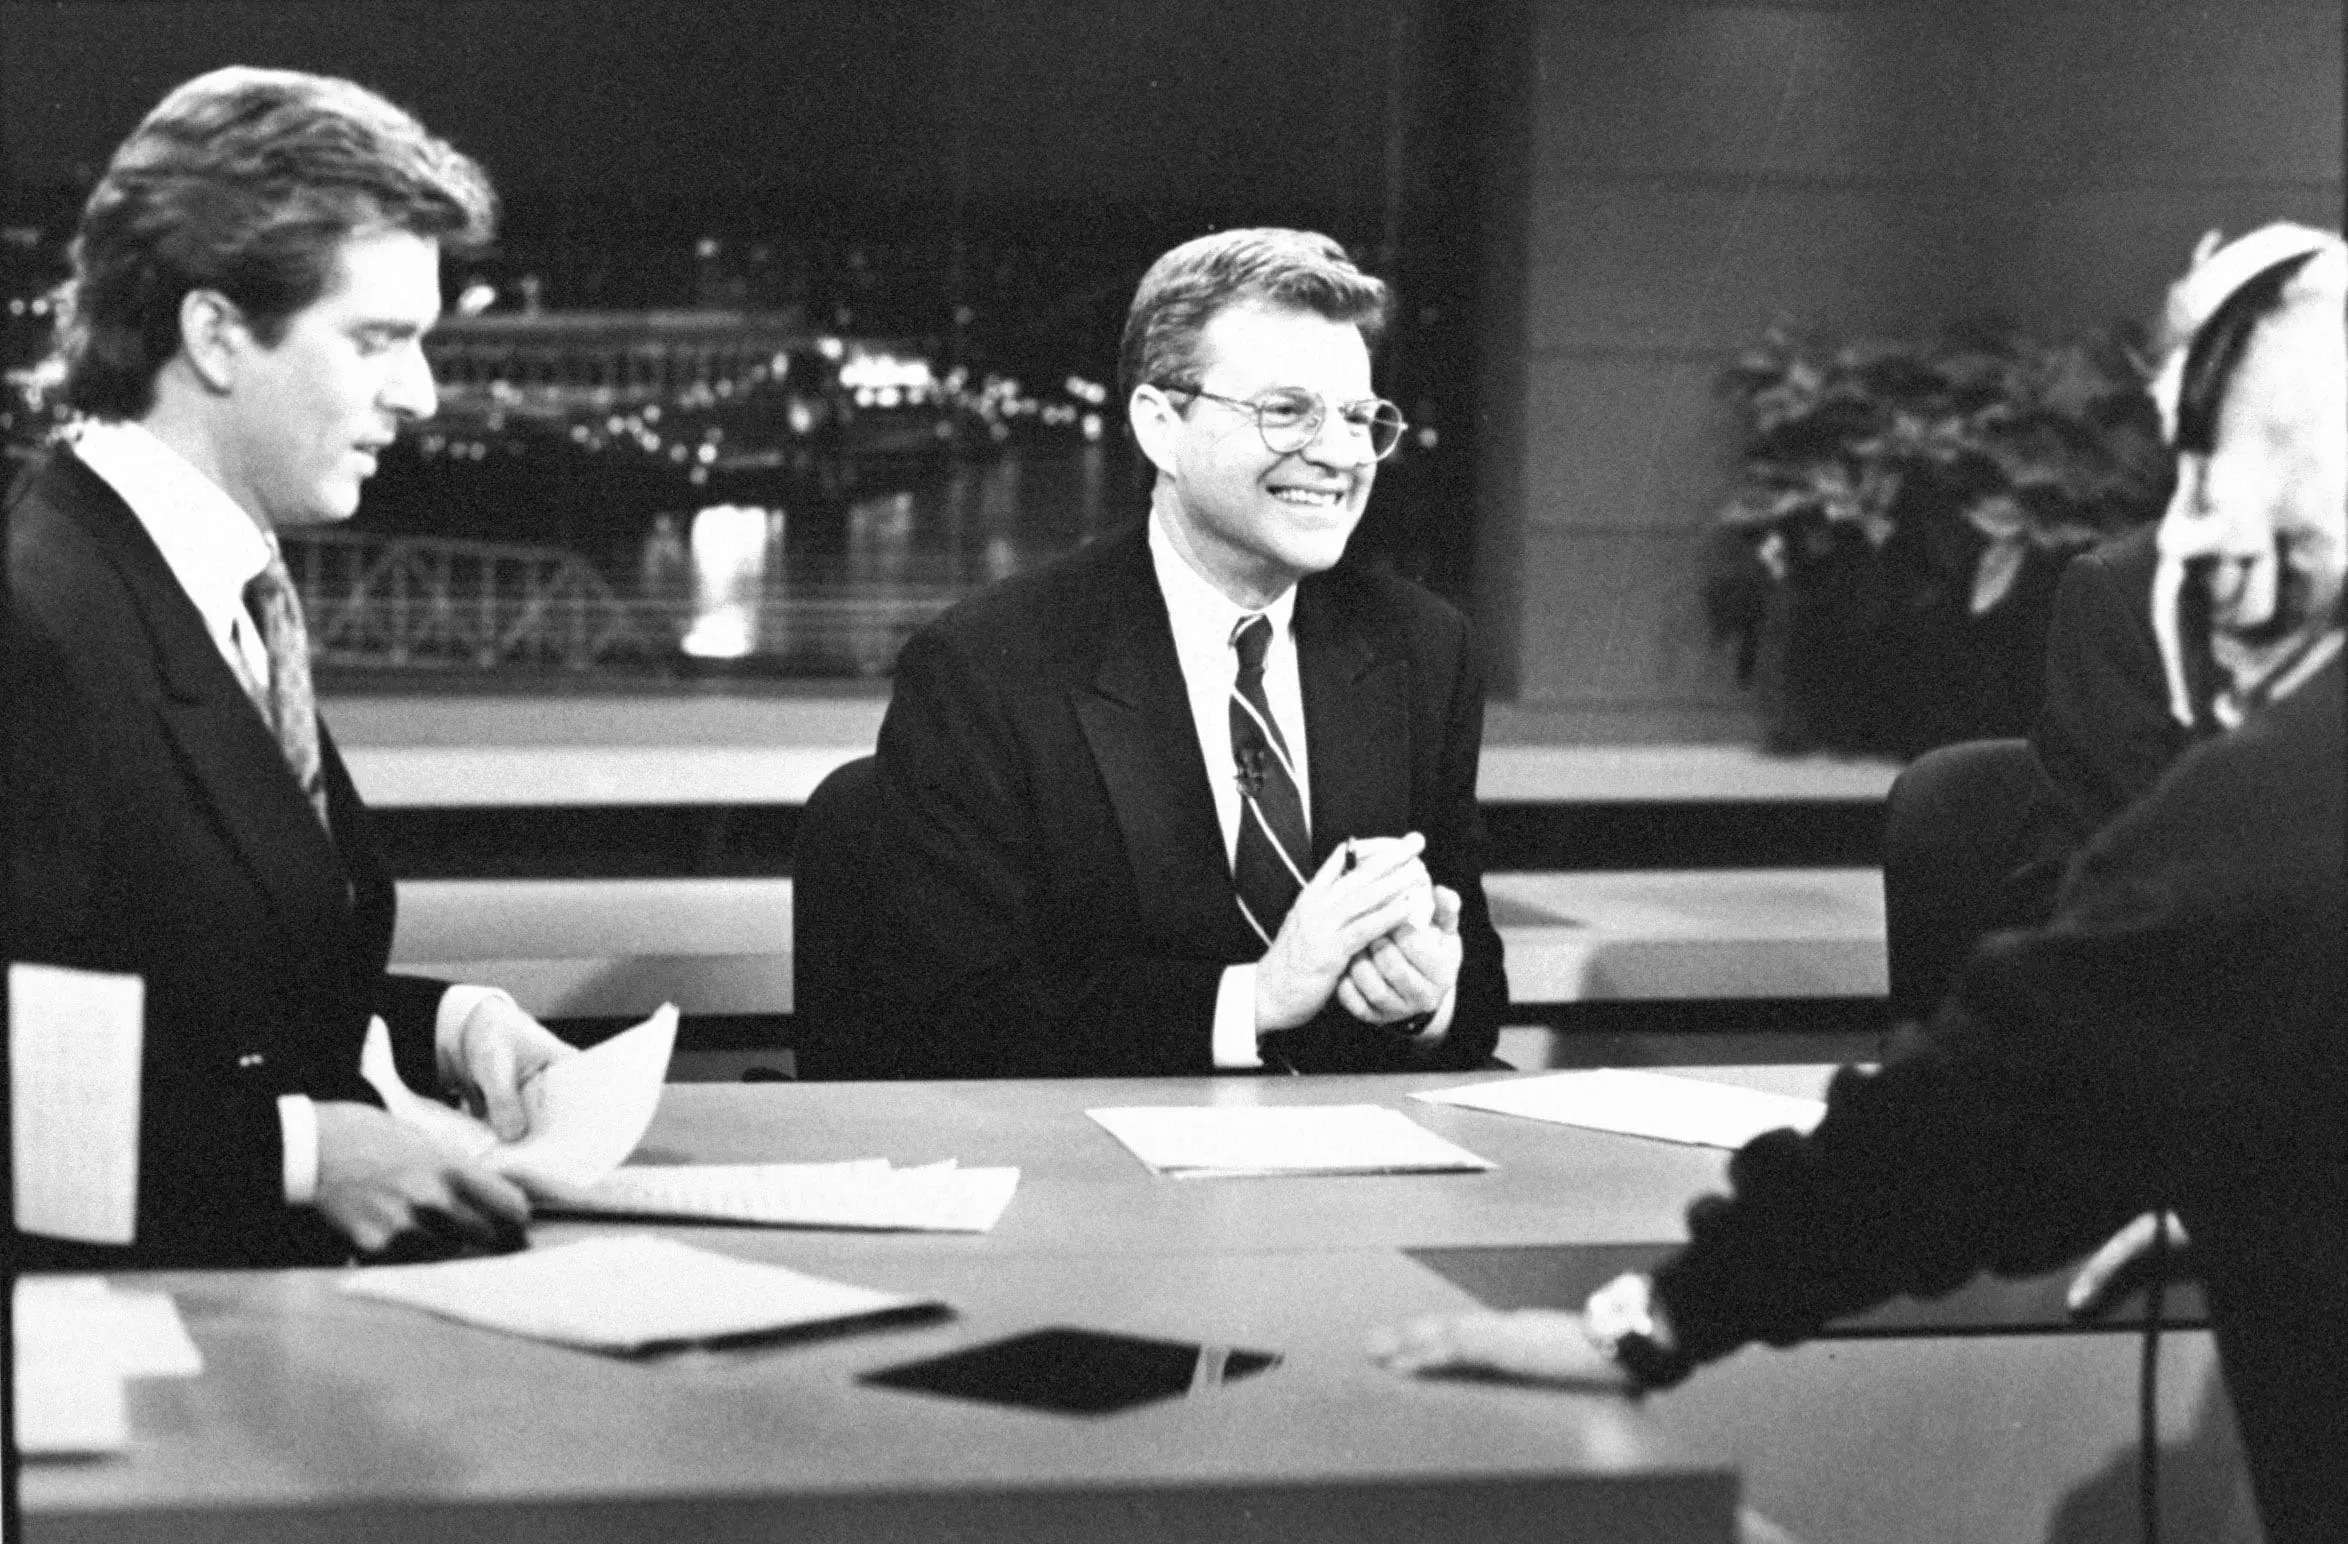 A black and white image of Jerry Springer speaking to Jim Watkins and a technician on a news set at WLWT-TV.